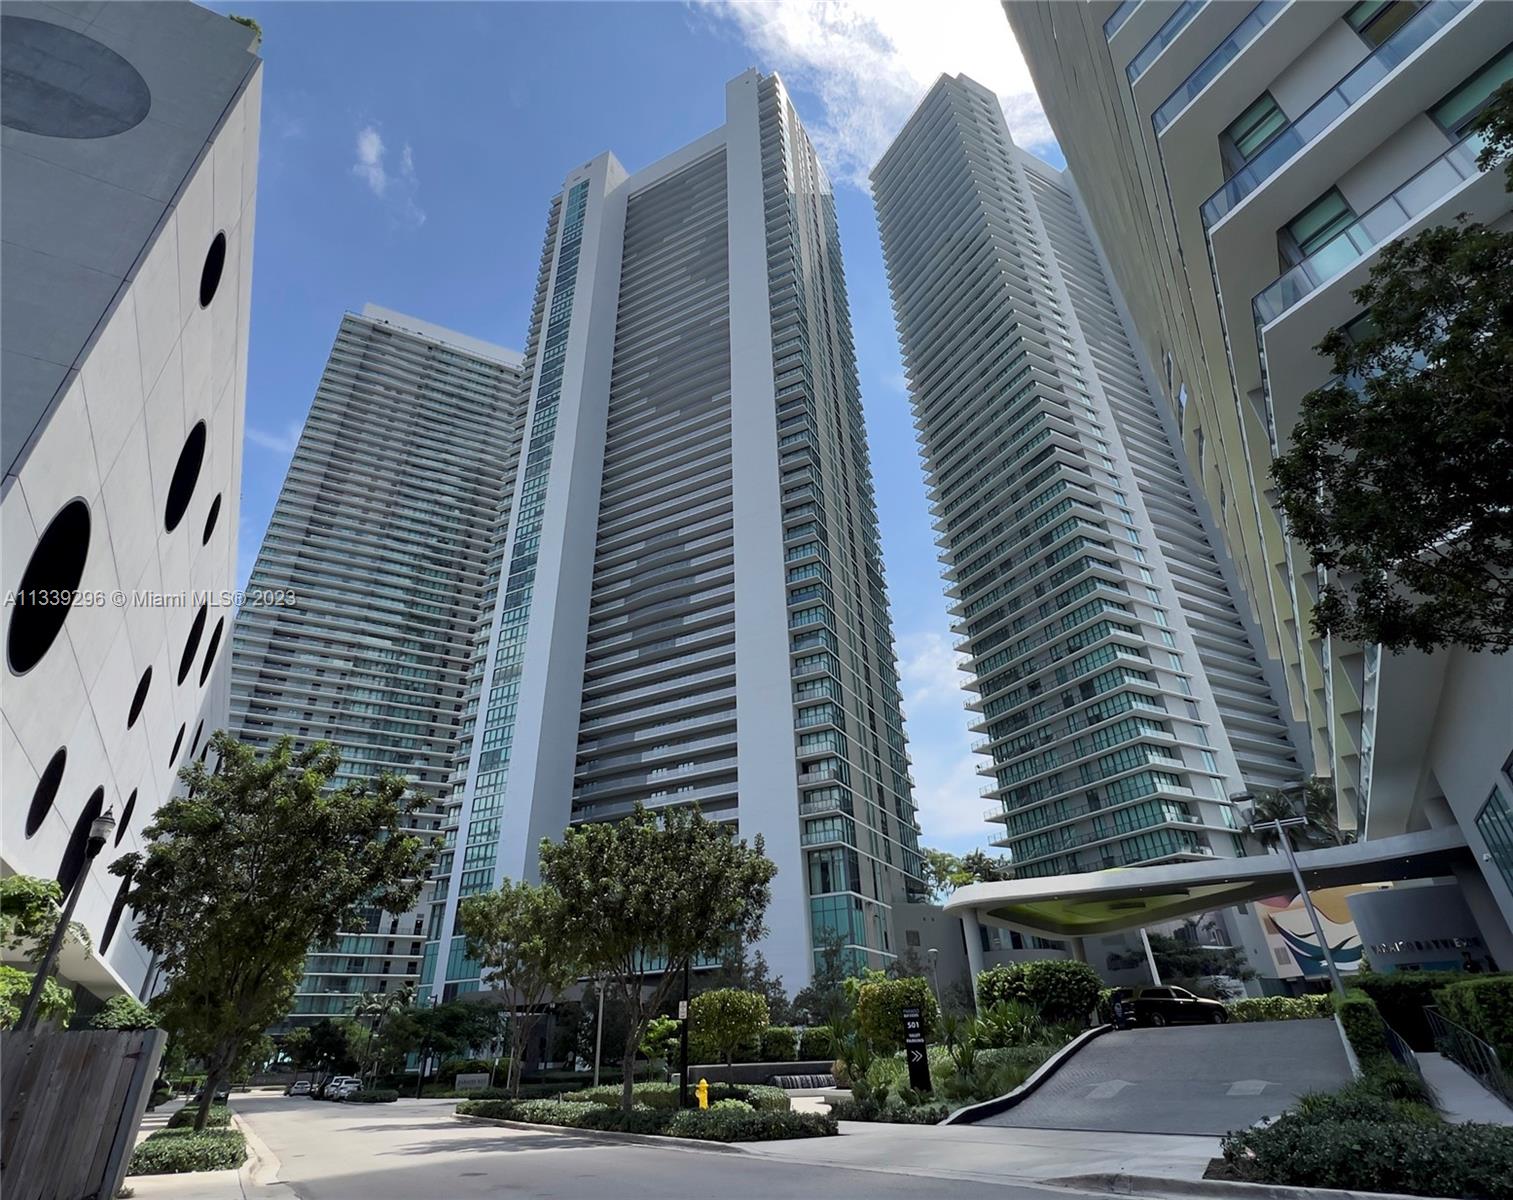 Breathless apartment in the amazing Paraiso bay features 3 beds 3.5 baths with private entry elevator. The unit offers an 8 deep balcony area in which you can enjoy the amazing views of Miami. Located in Edgewater. Rentals period are minimum 3 months although owner prefer one year period rentals.